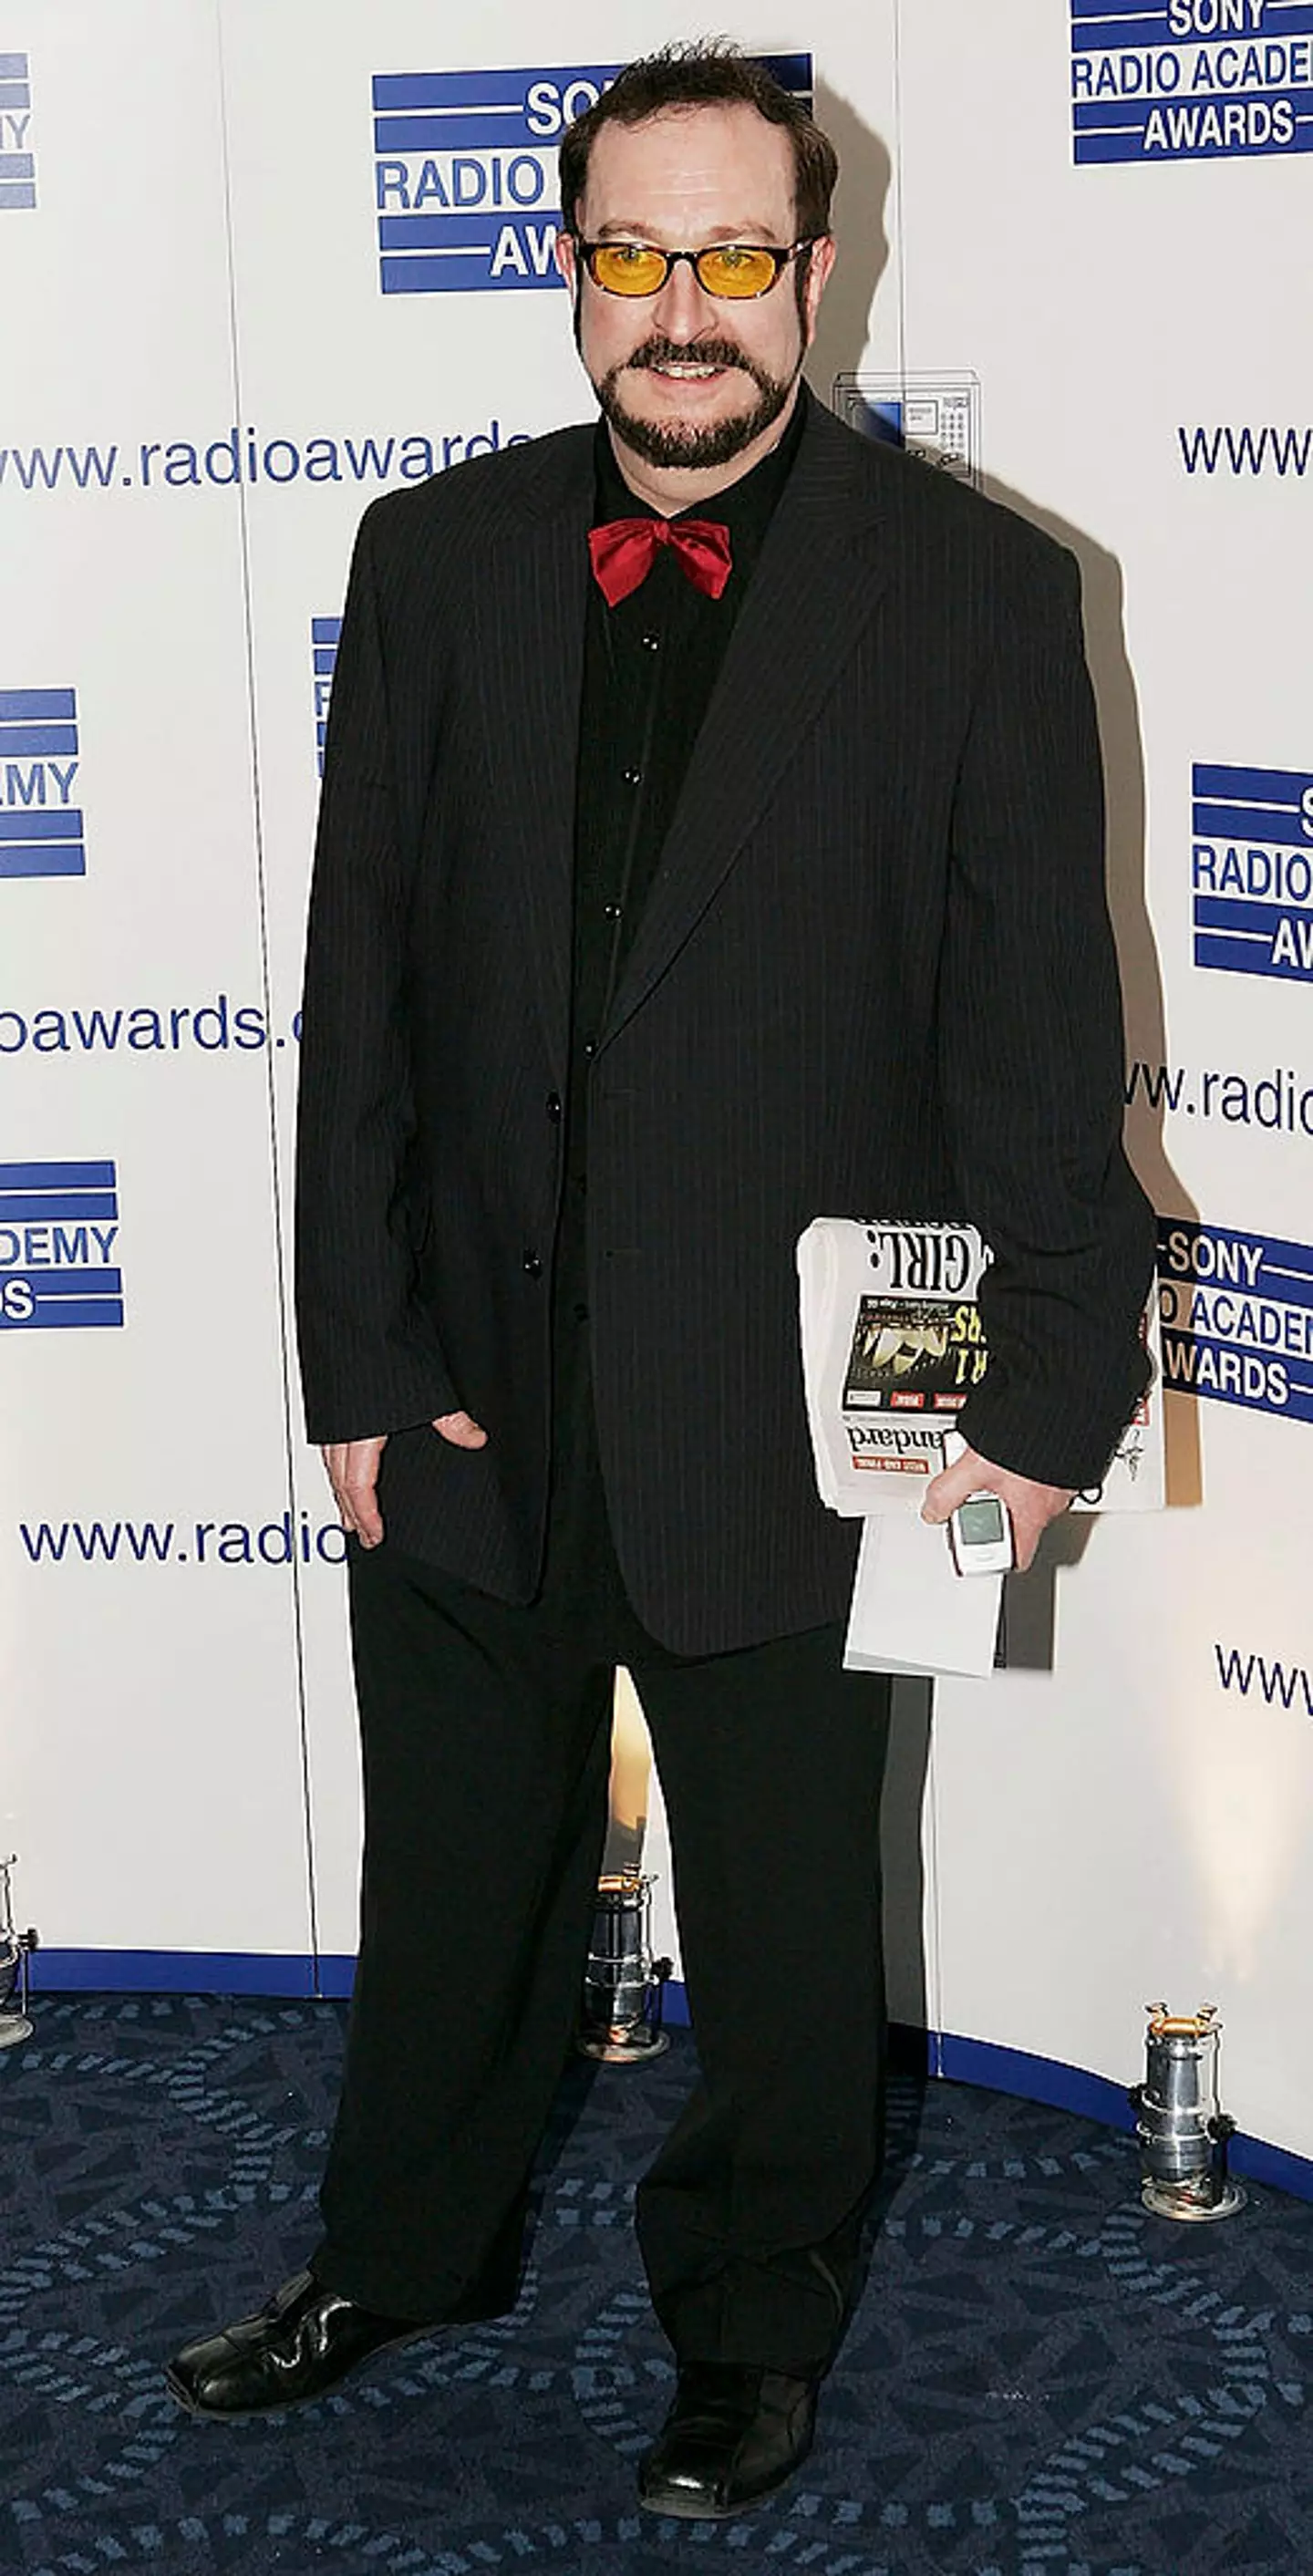 BBC Radio DJ Steve Wright has died, it has been announced today.